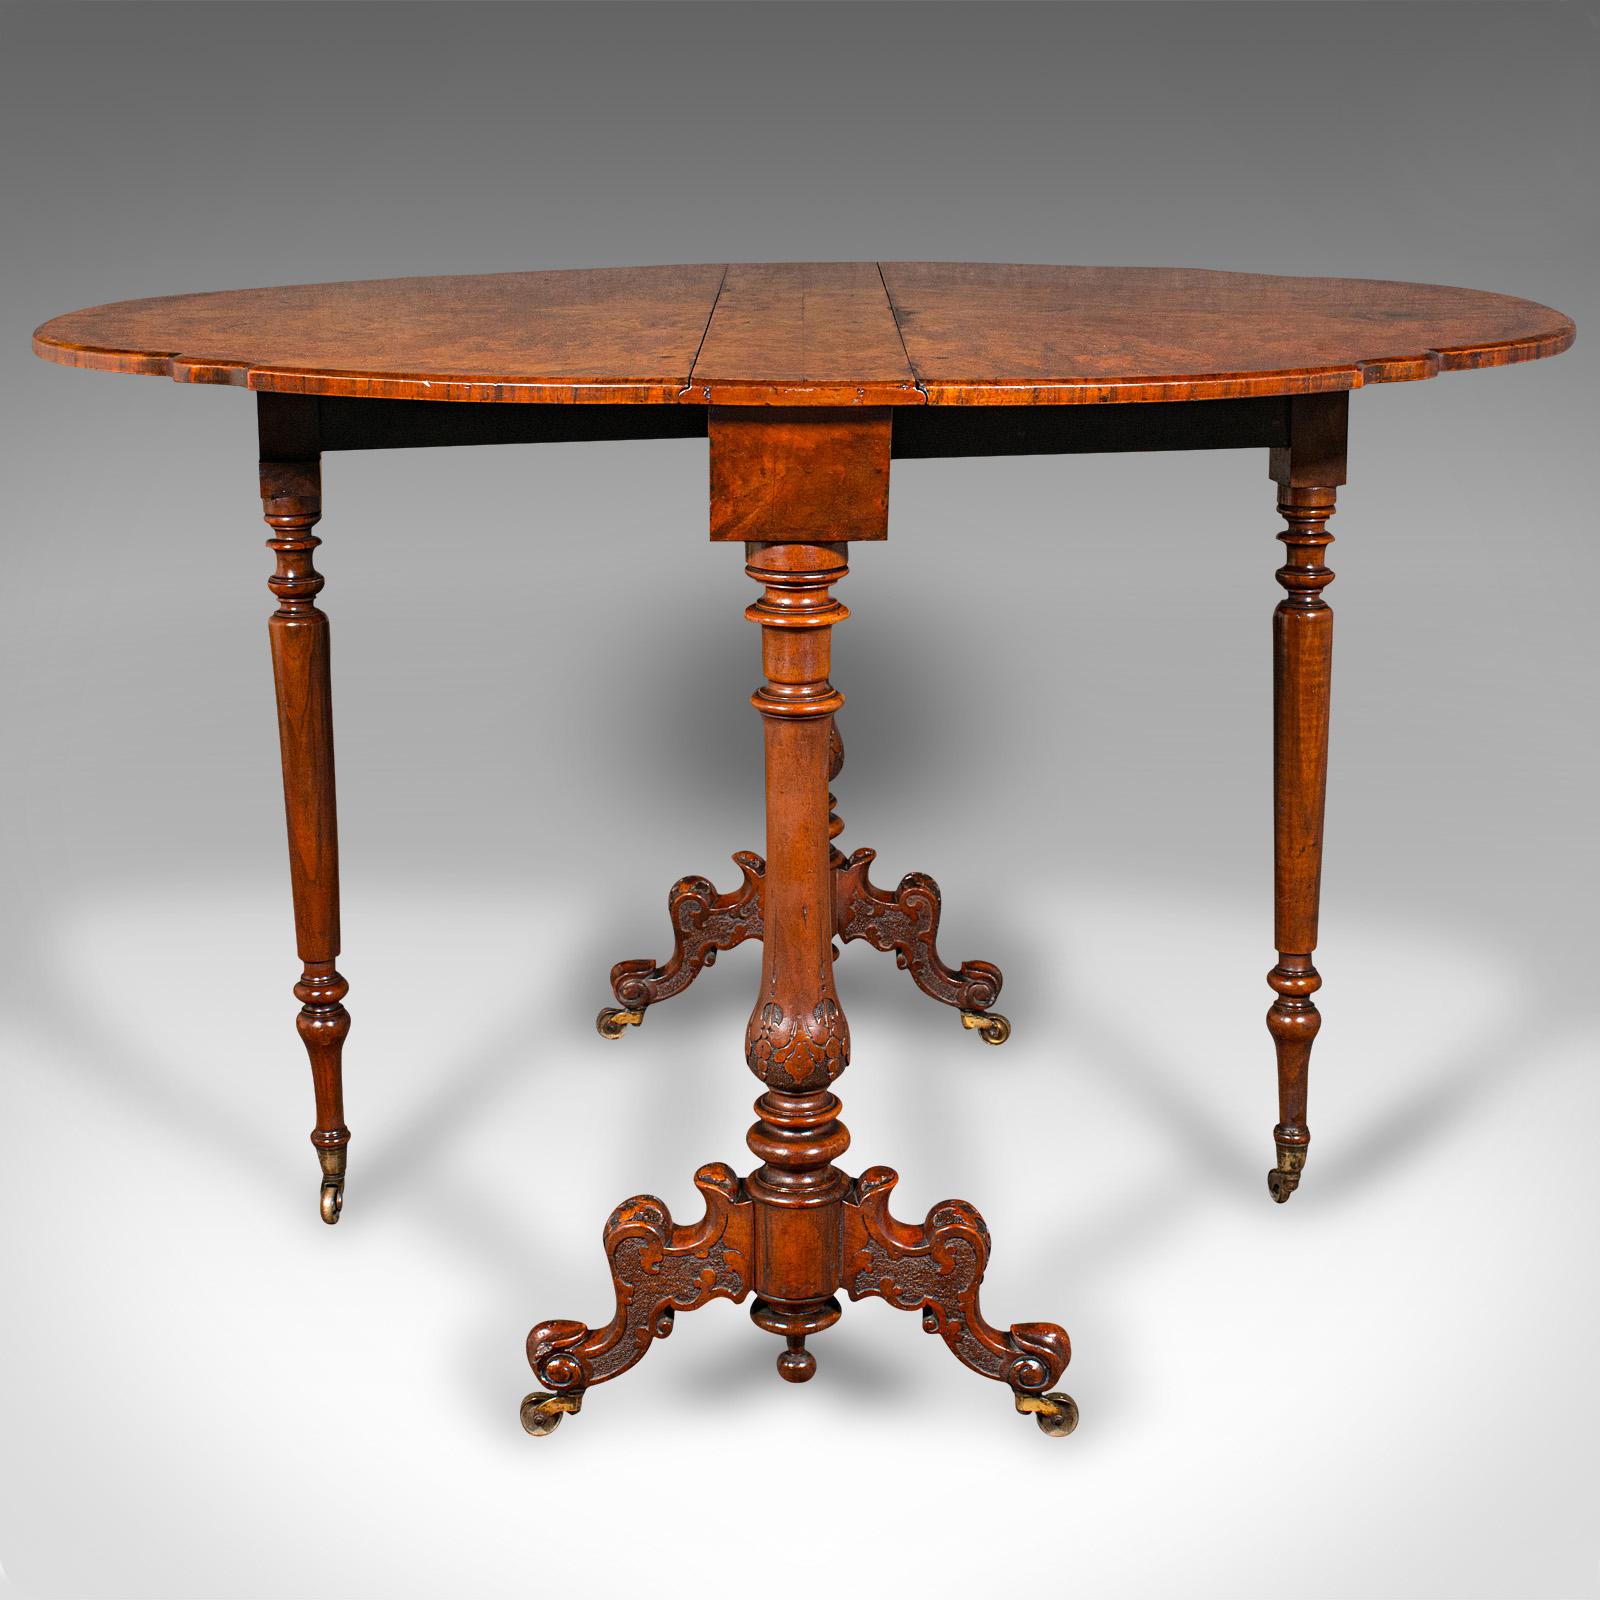 19th Century Antique Sutherland Table, English, Burr Walnut, 4 Seat, Occasional, Victorian For Sale